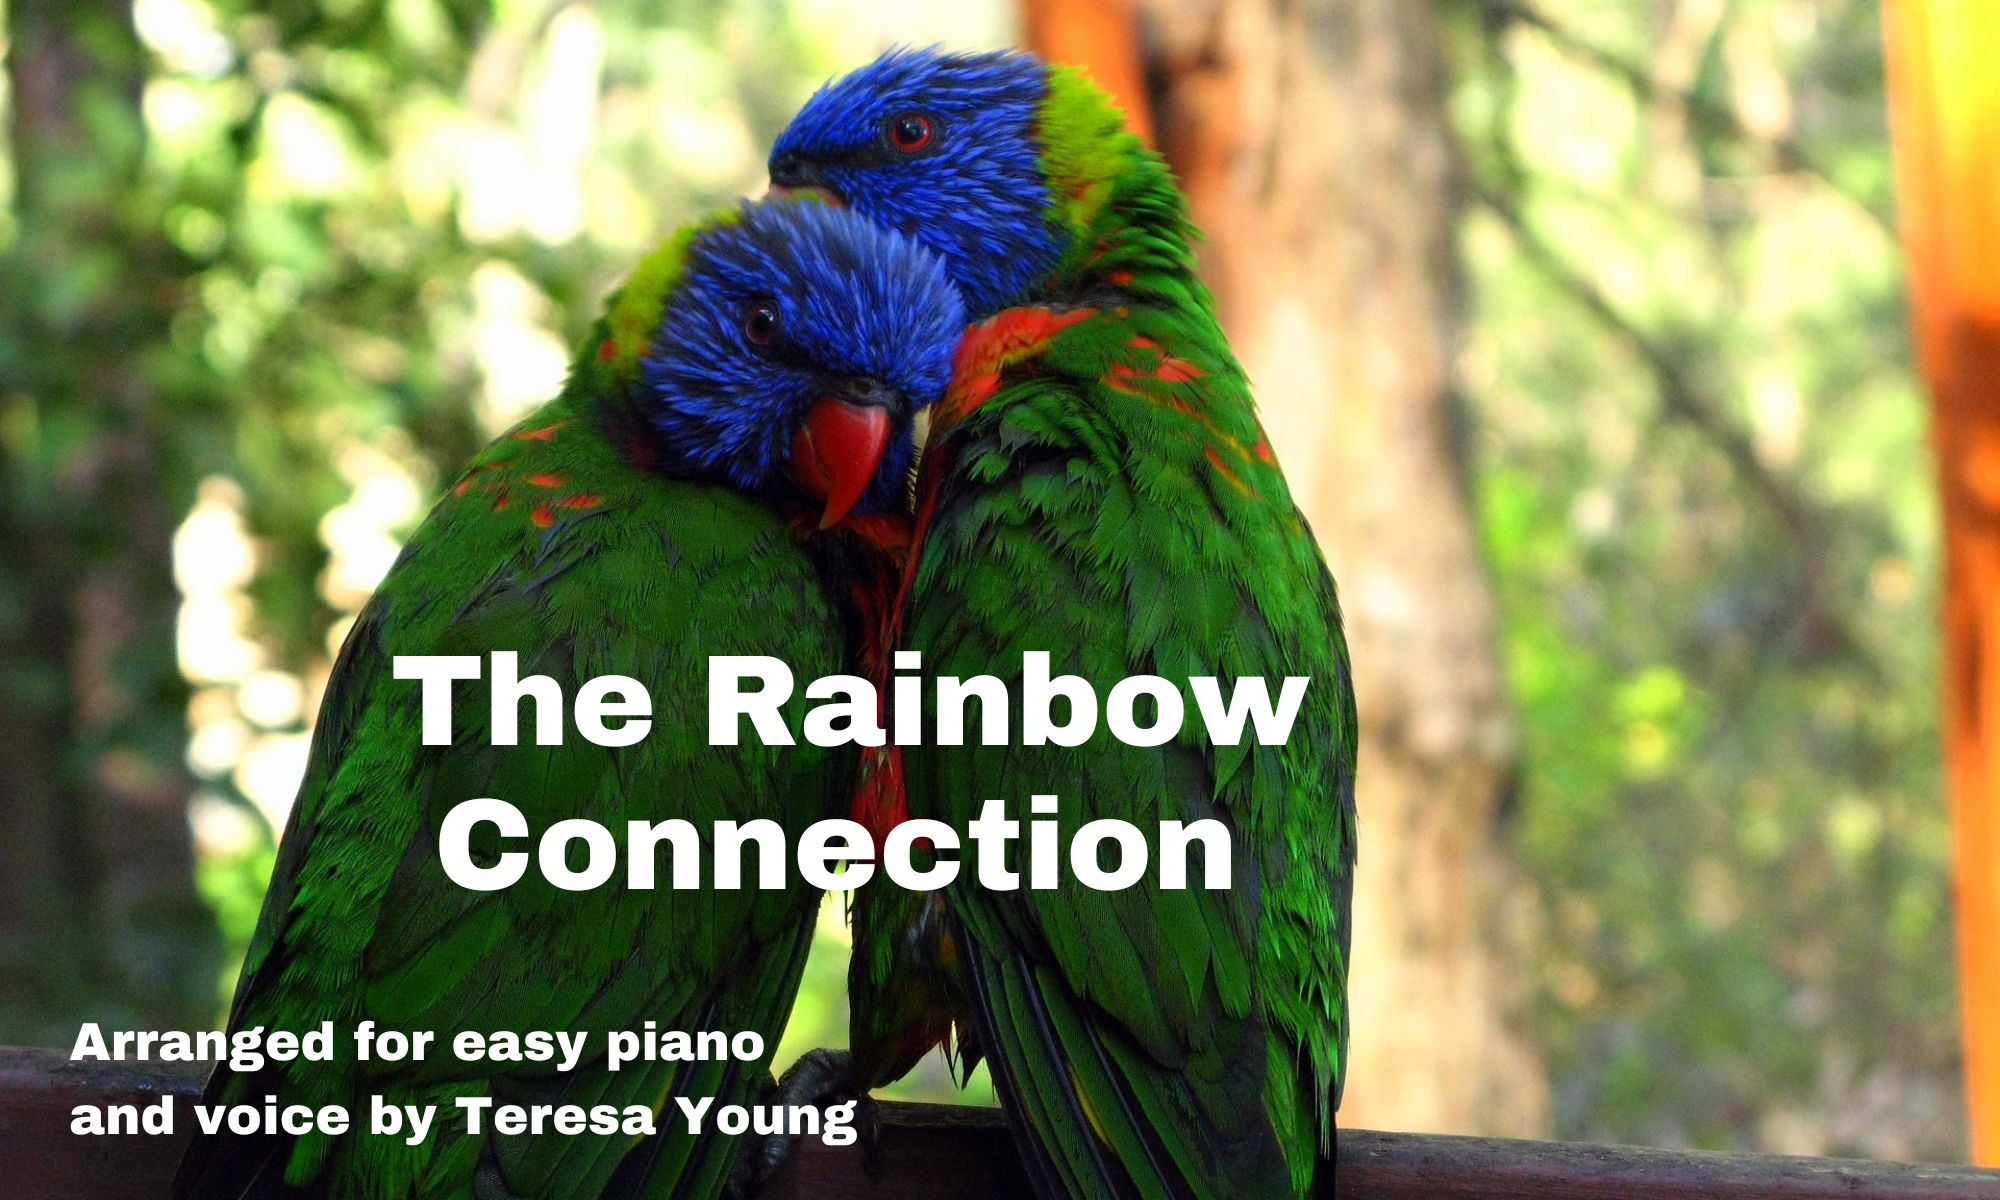 The Rainbow Connection, arr. by Teresa Young